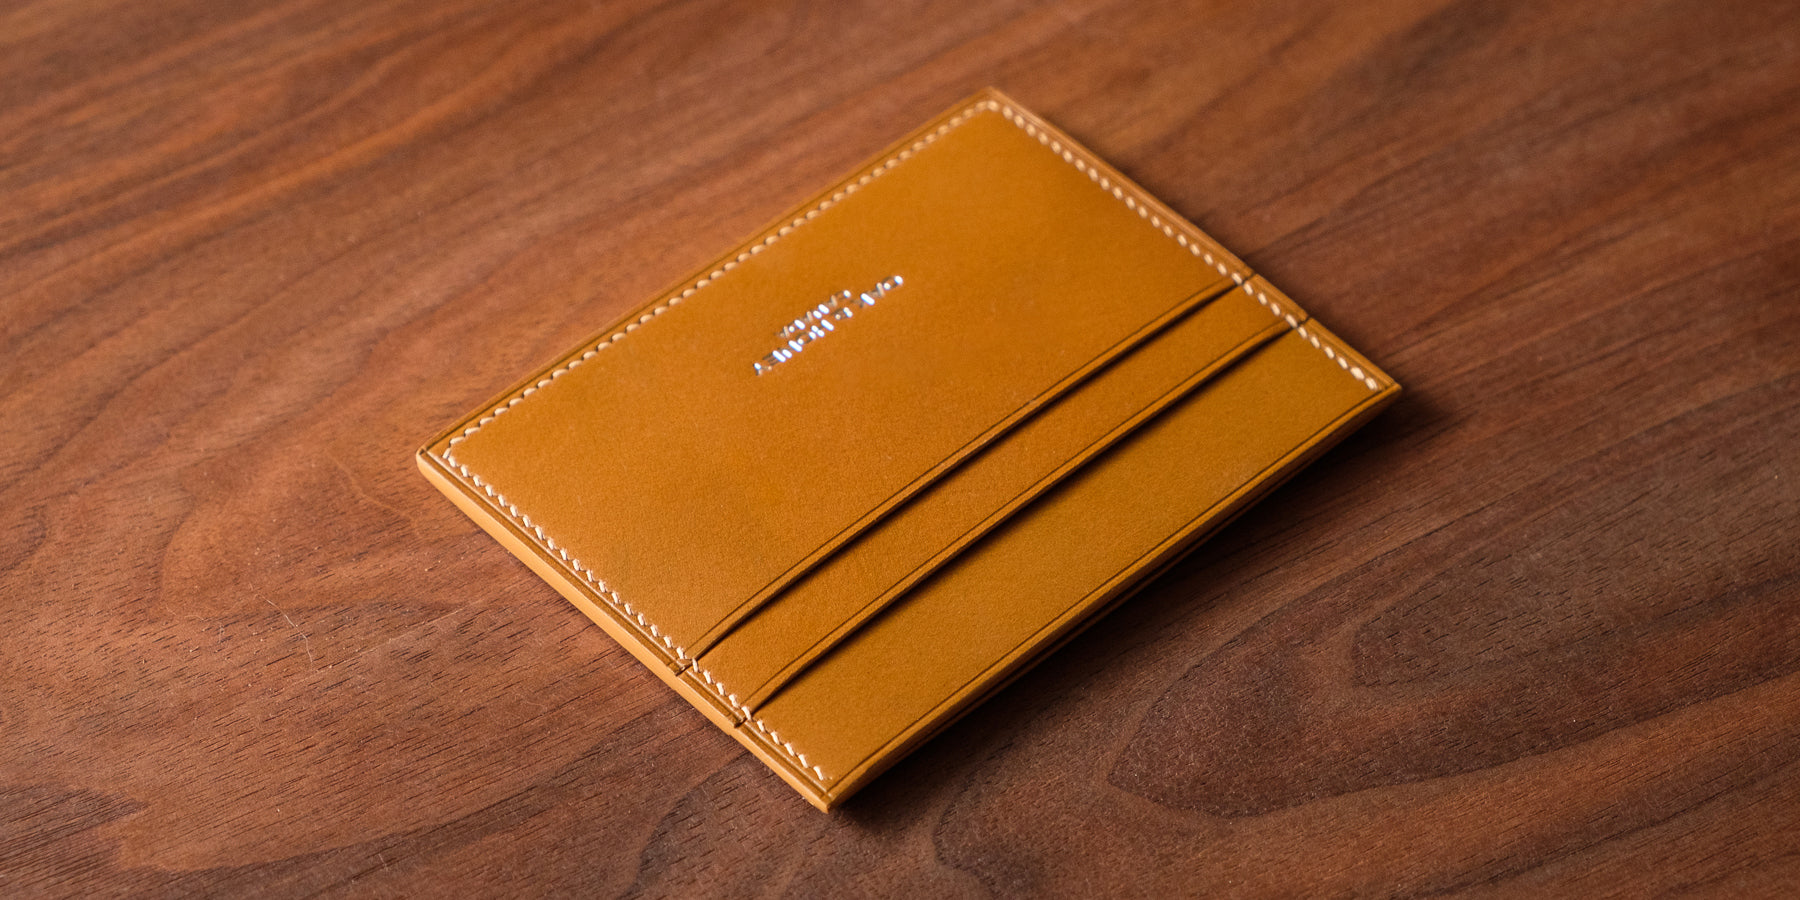 Custom Leather Cardholder - Made in Canada - Oak and Honey Leather Goods